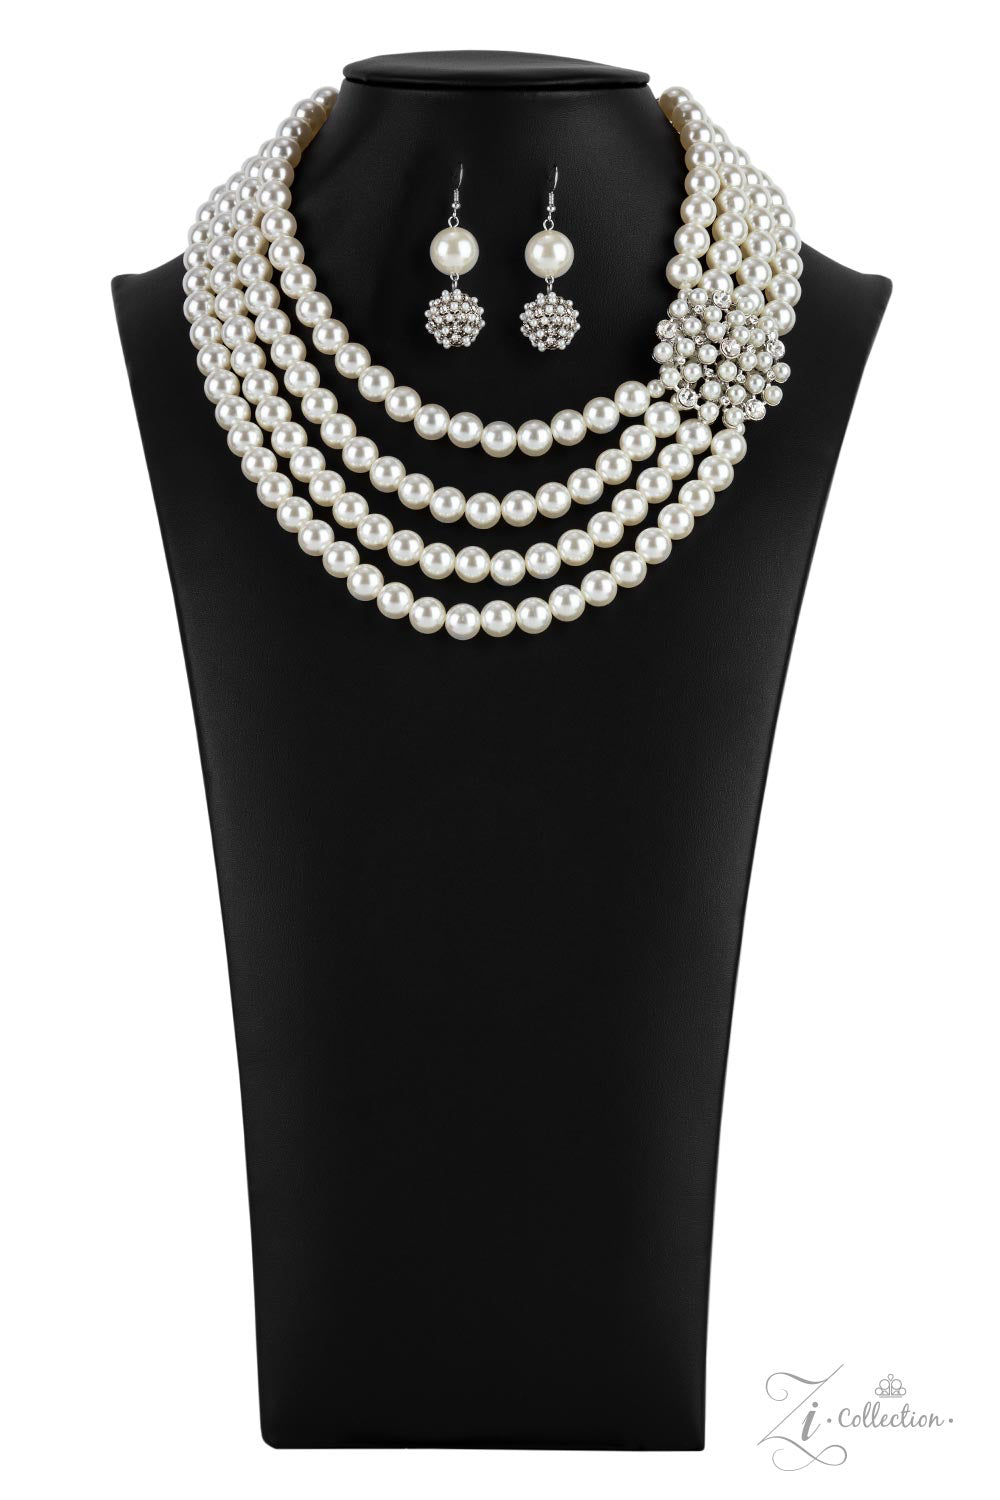 Romantic 2021 Zi Collection Necklace - Paparazzi Accessories  Inspired by royalty, an elegant explosion of classic white rhinestones and timeless pearls delicately coalesces into a vintage brooch. The refined ornament delicately holds together strands of oversized pearls, creating romantically regal layers below the collar. Features an adjustable clasp closure.  Sold as one individual necklace. Includes one pair of matching earrings.